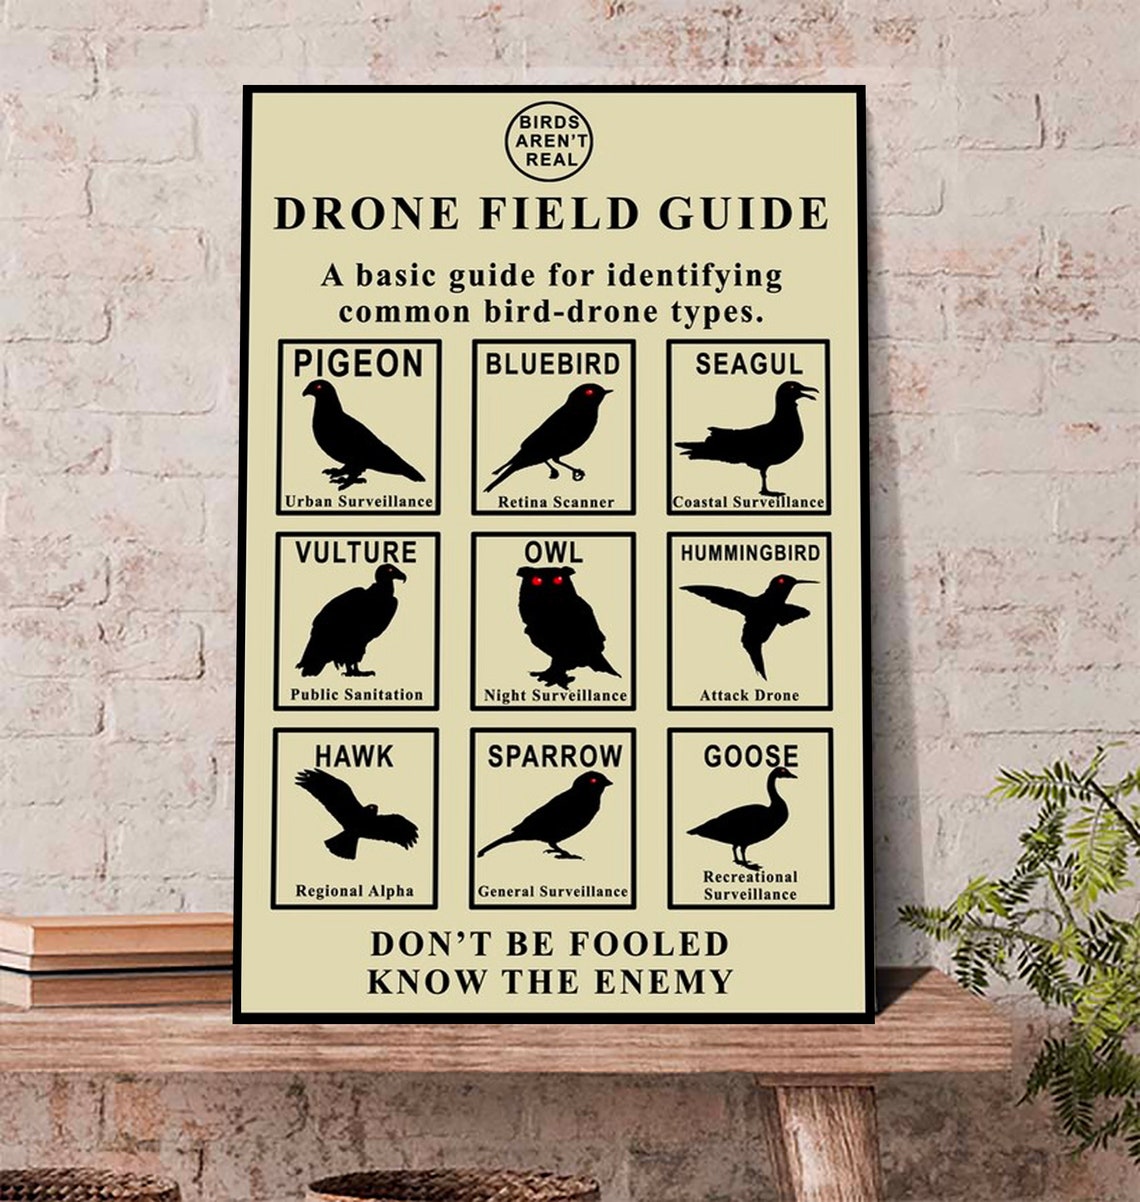 birds-arent-real-poster-birds-arent-real-drone-field-guide-poster-.jpg